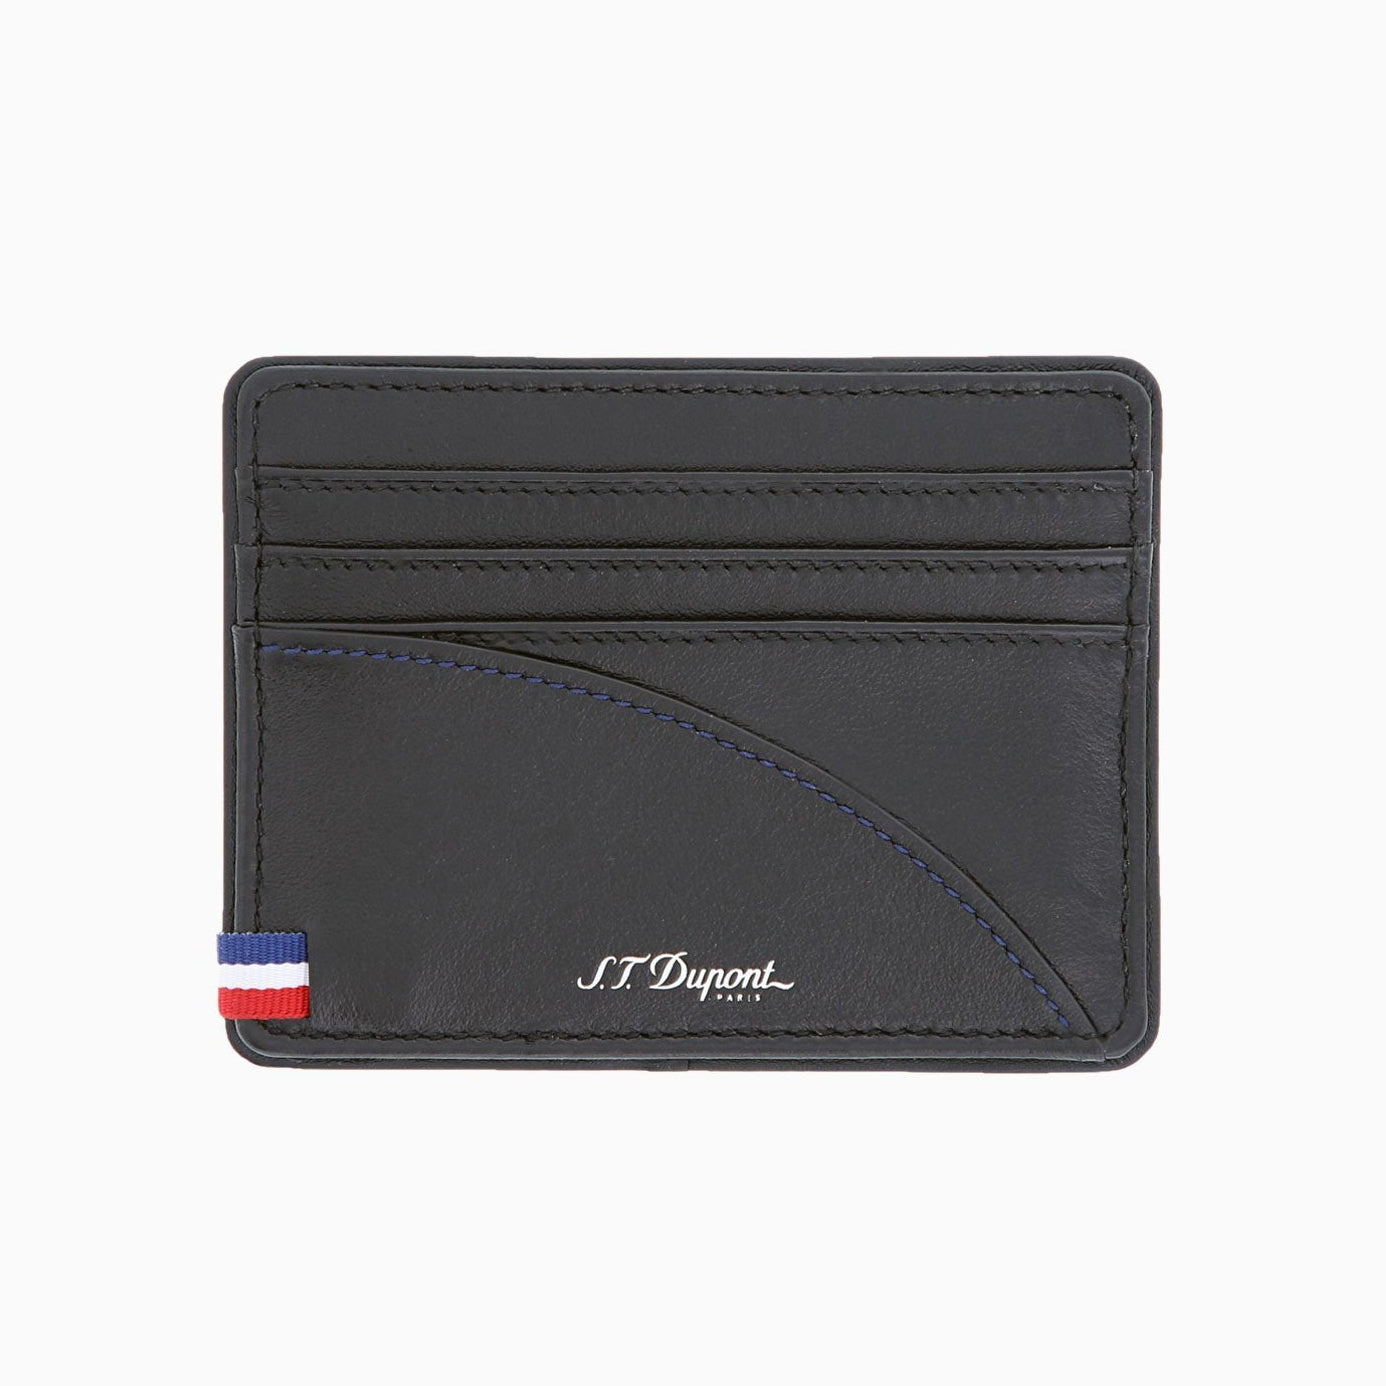 Habanos Specialist Vietnam ACCESSORIES [style_3597390255853] Ví da đựng thẻ hiệu S.T.Dupont (LEATHER CREDIT CARD HOLDER style no 172004).